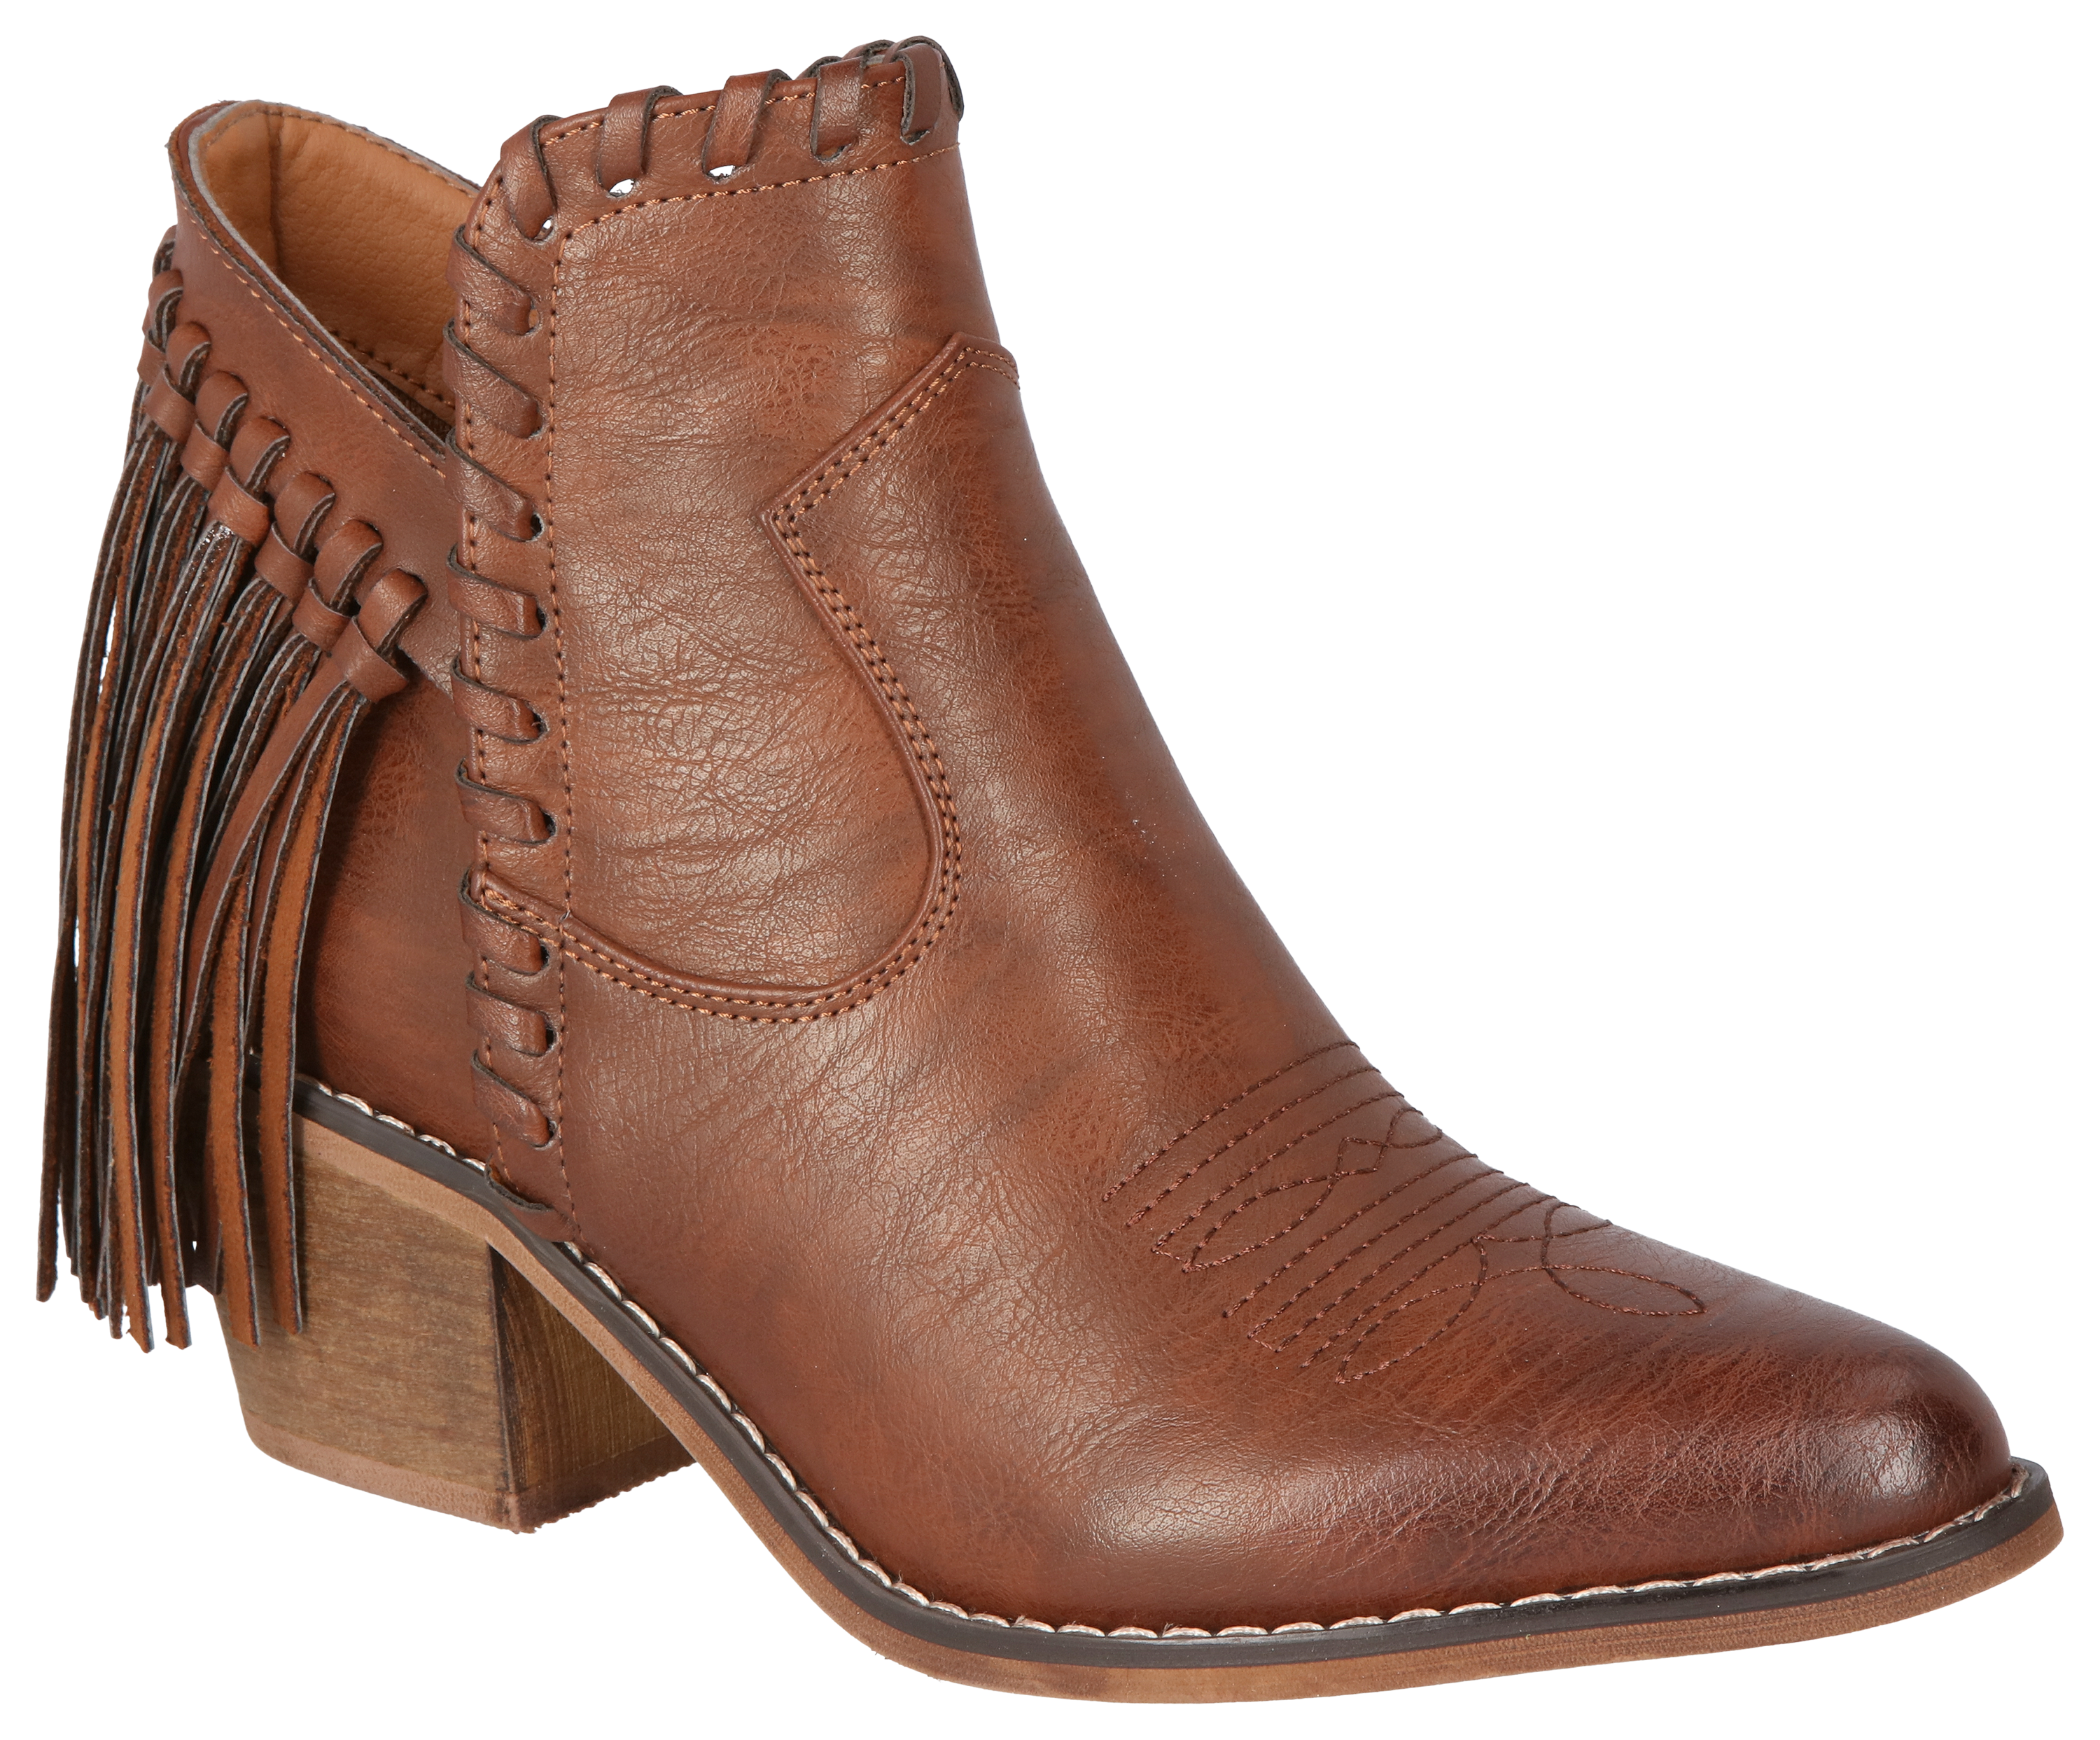 Natural Reflections Keykee Tassel Boots for Ladies - Whiskey - 10M